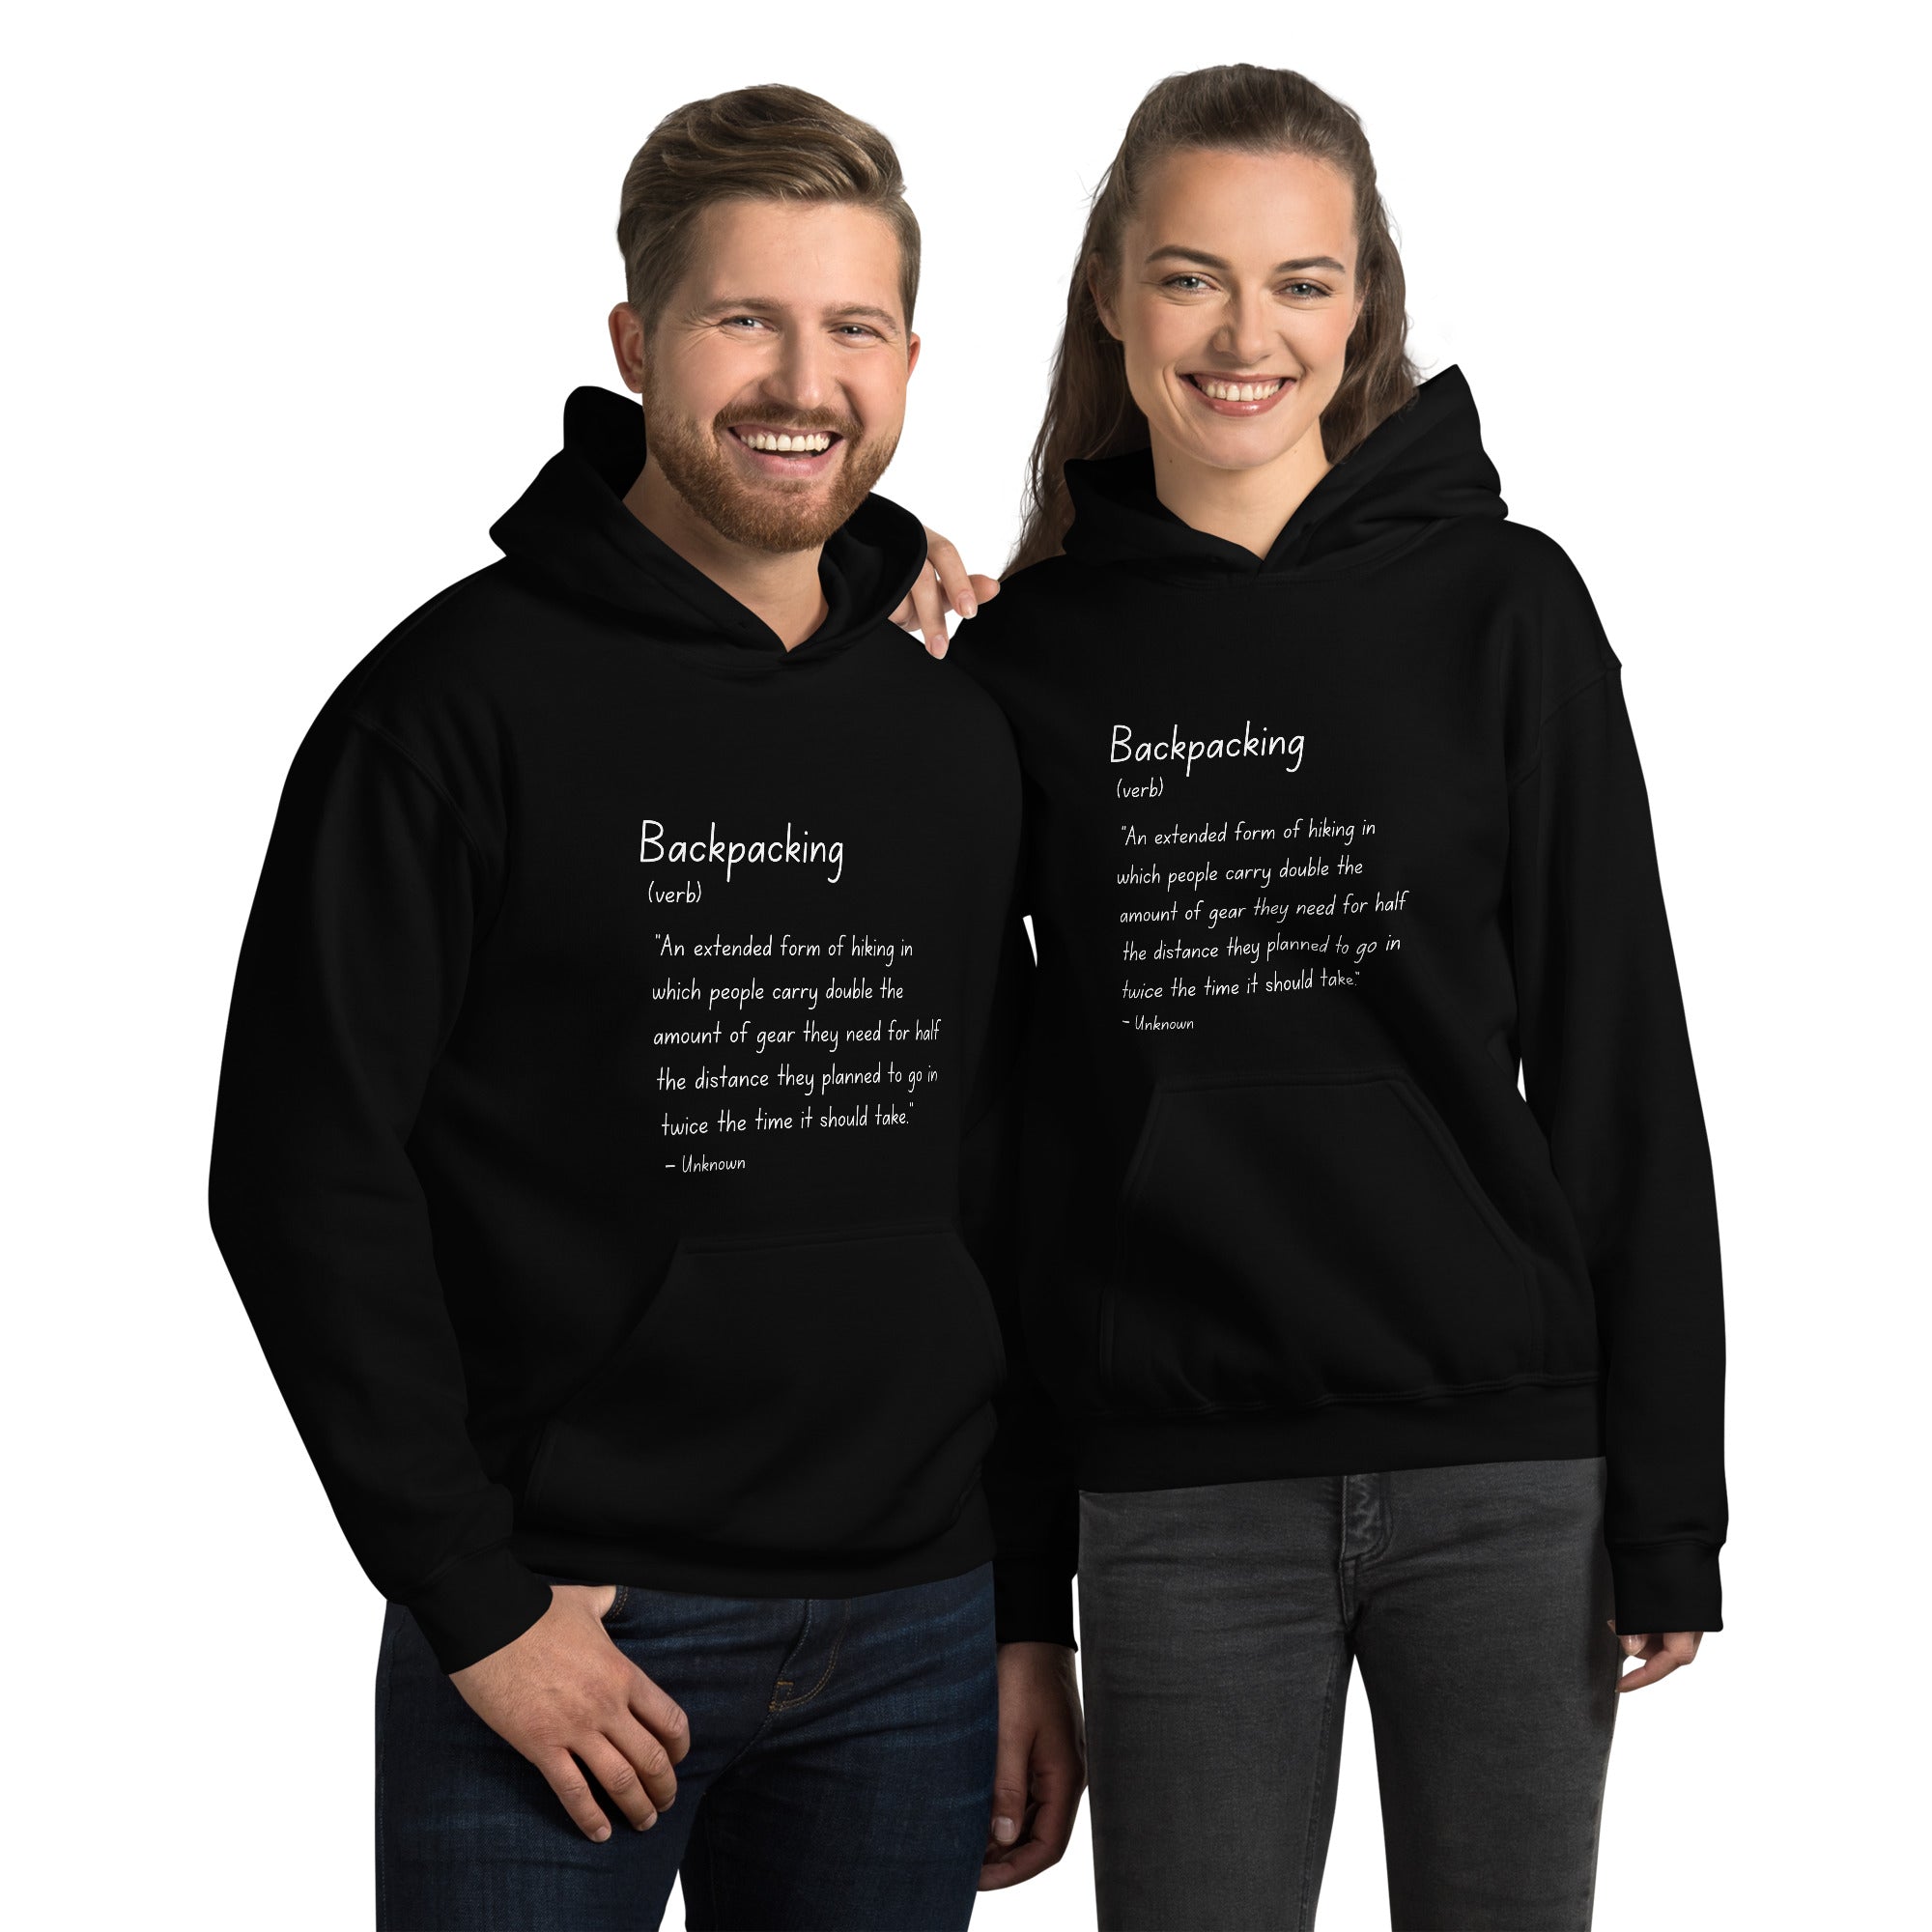 Backpacking...an extended form of hiking... - Funny definition - Unisex Hoodie